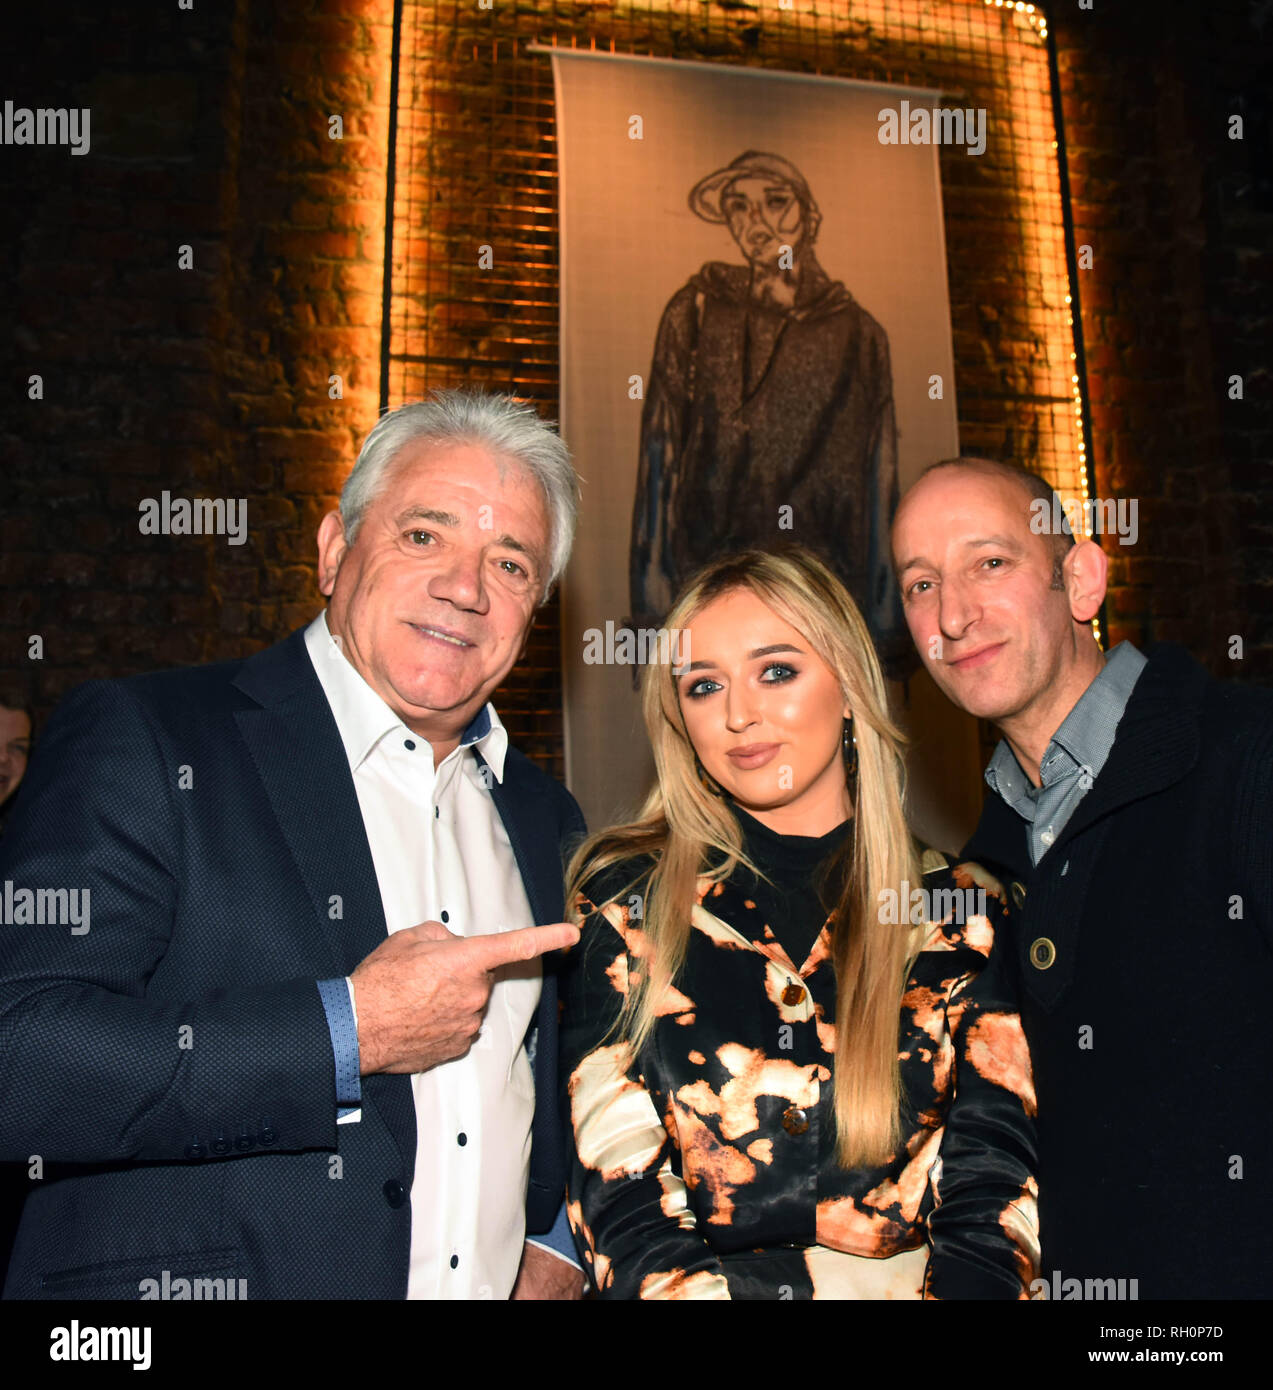 Manchester, UK. 31st left Kevin Keegan MMU stident Morgan Allen who designed the Mural pictured behind her and Mark Hamburger and creator of the Yard, Stangeways Credit: Della Batchelor/Alamy